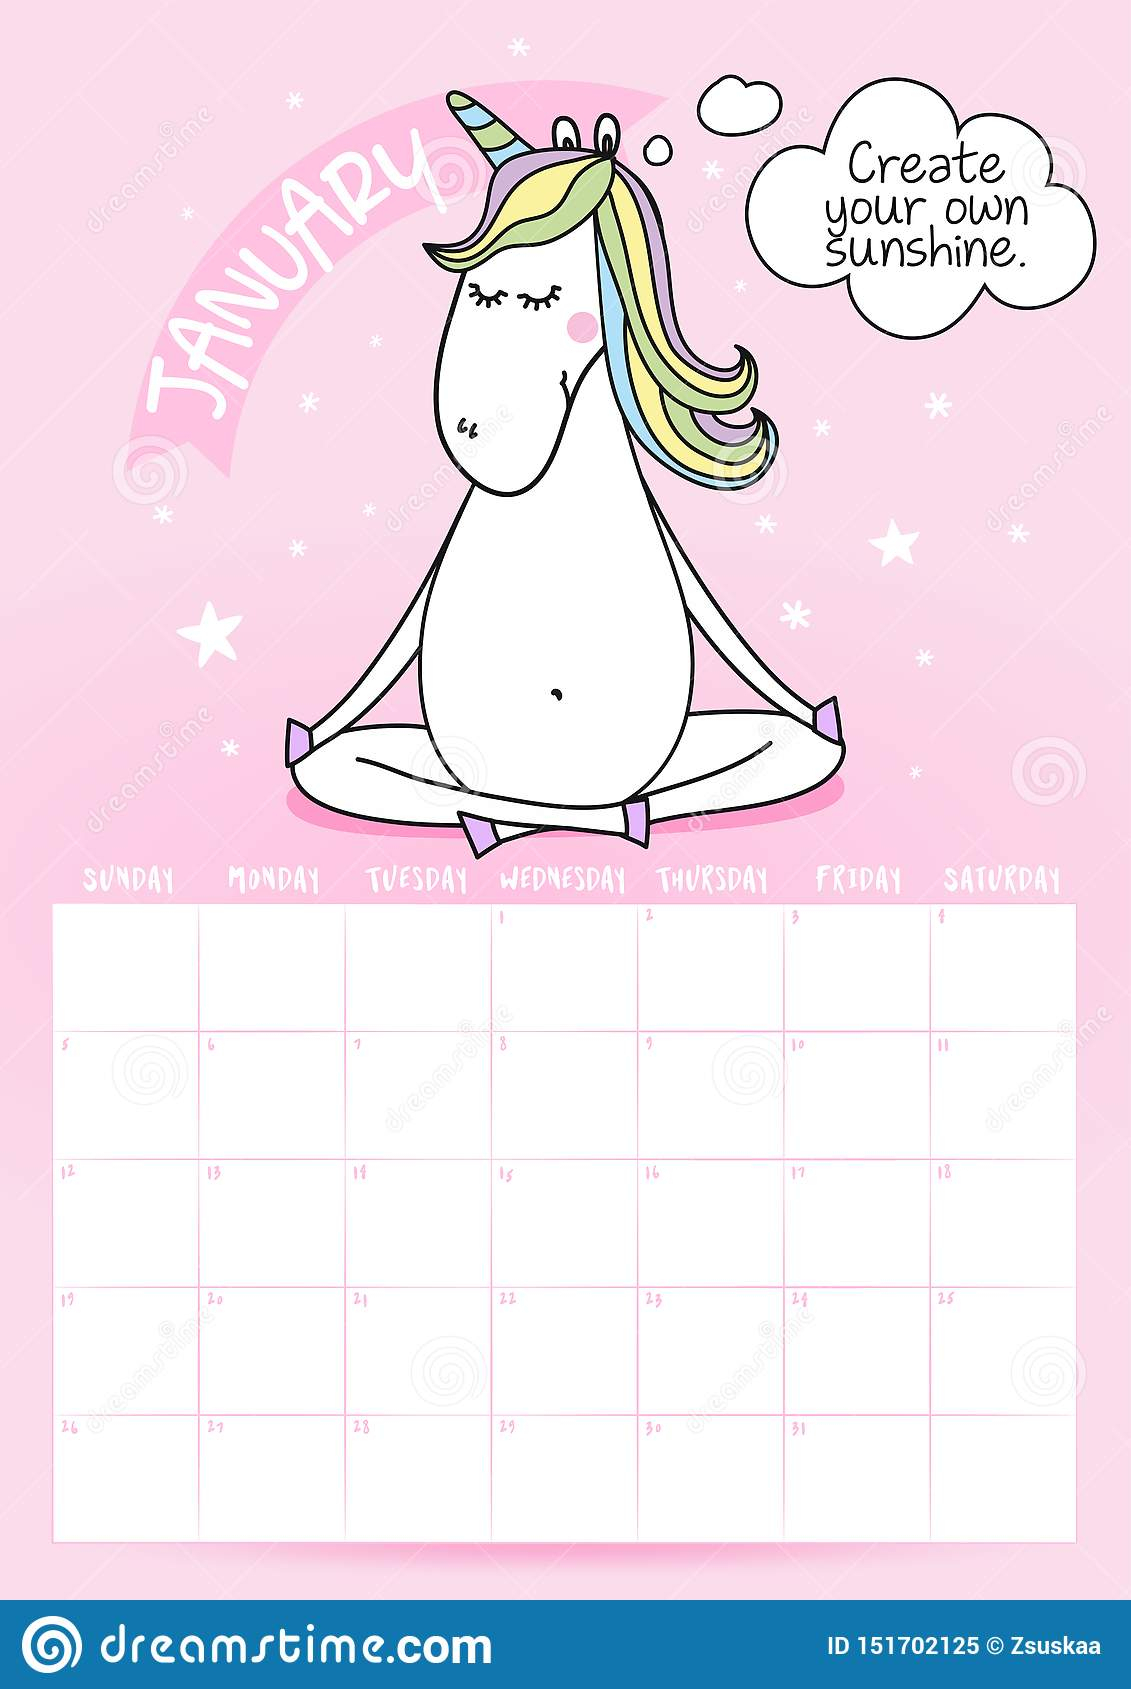 2020 January Calendar With Calligraphy Phrase And Unicorn